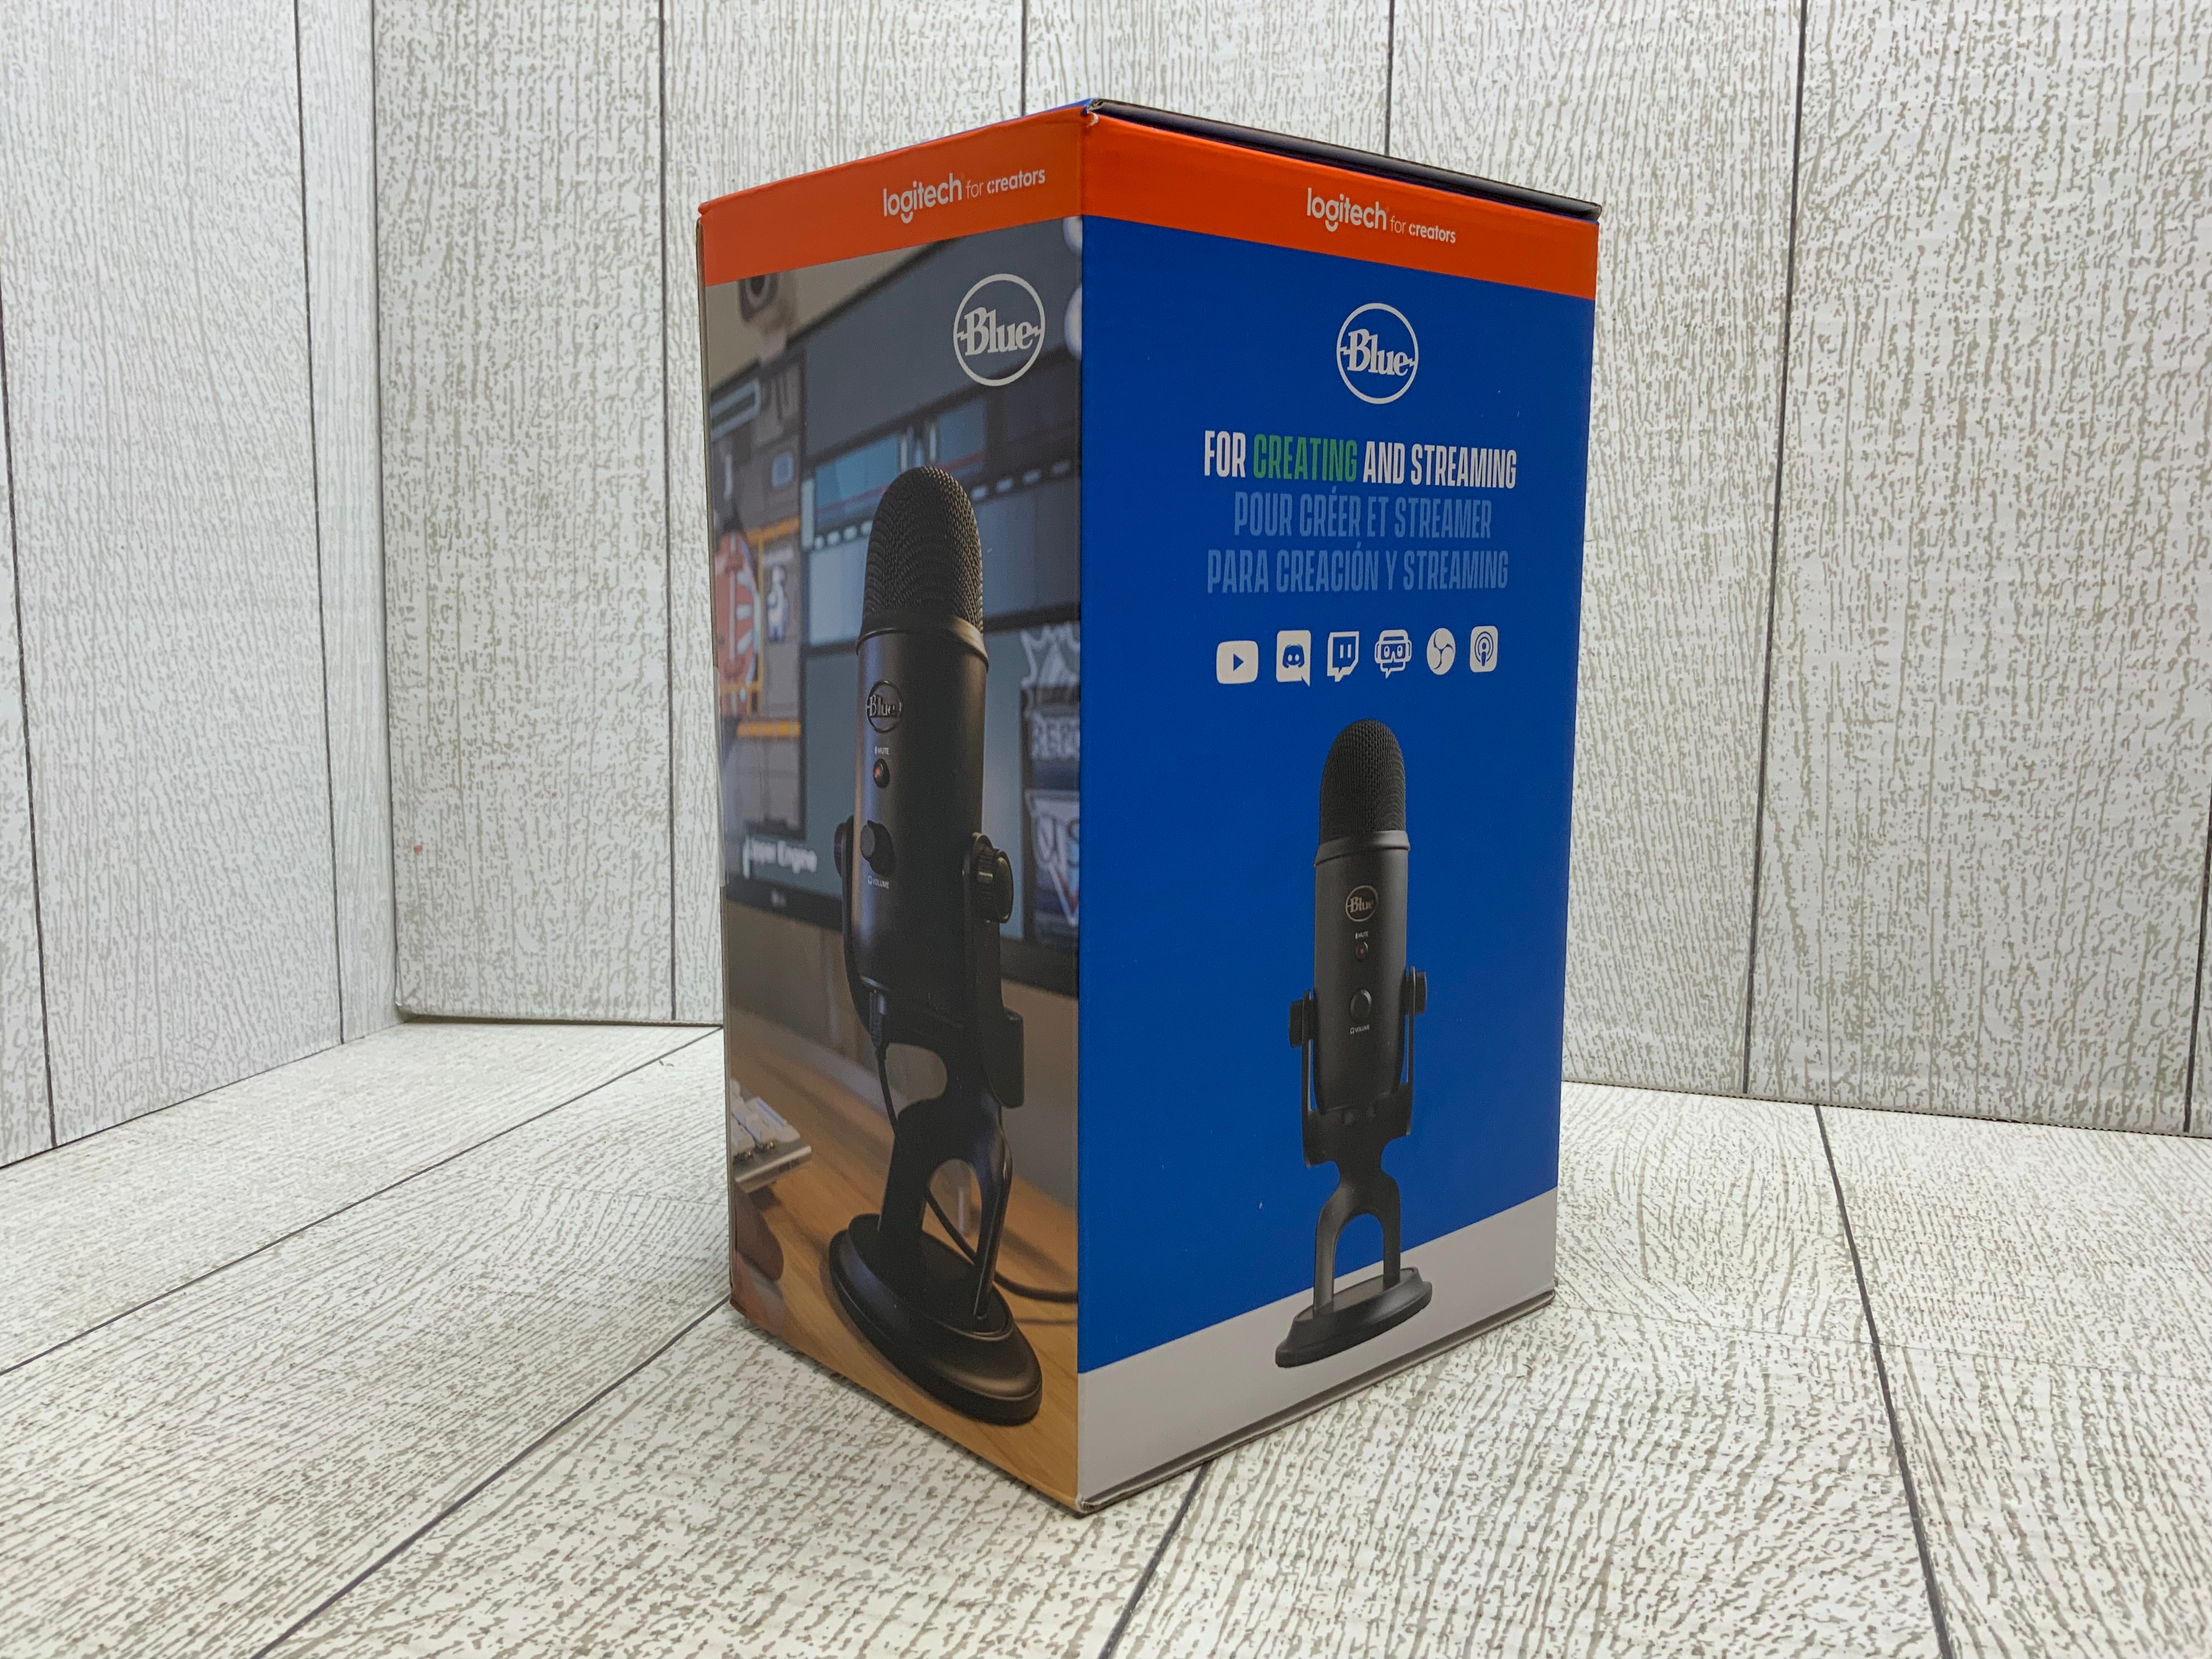 Blue Yeti USB Microphone for PC, Mac, Gaming, Recording, Streaming, Podcasting (8055276404974)